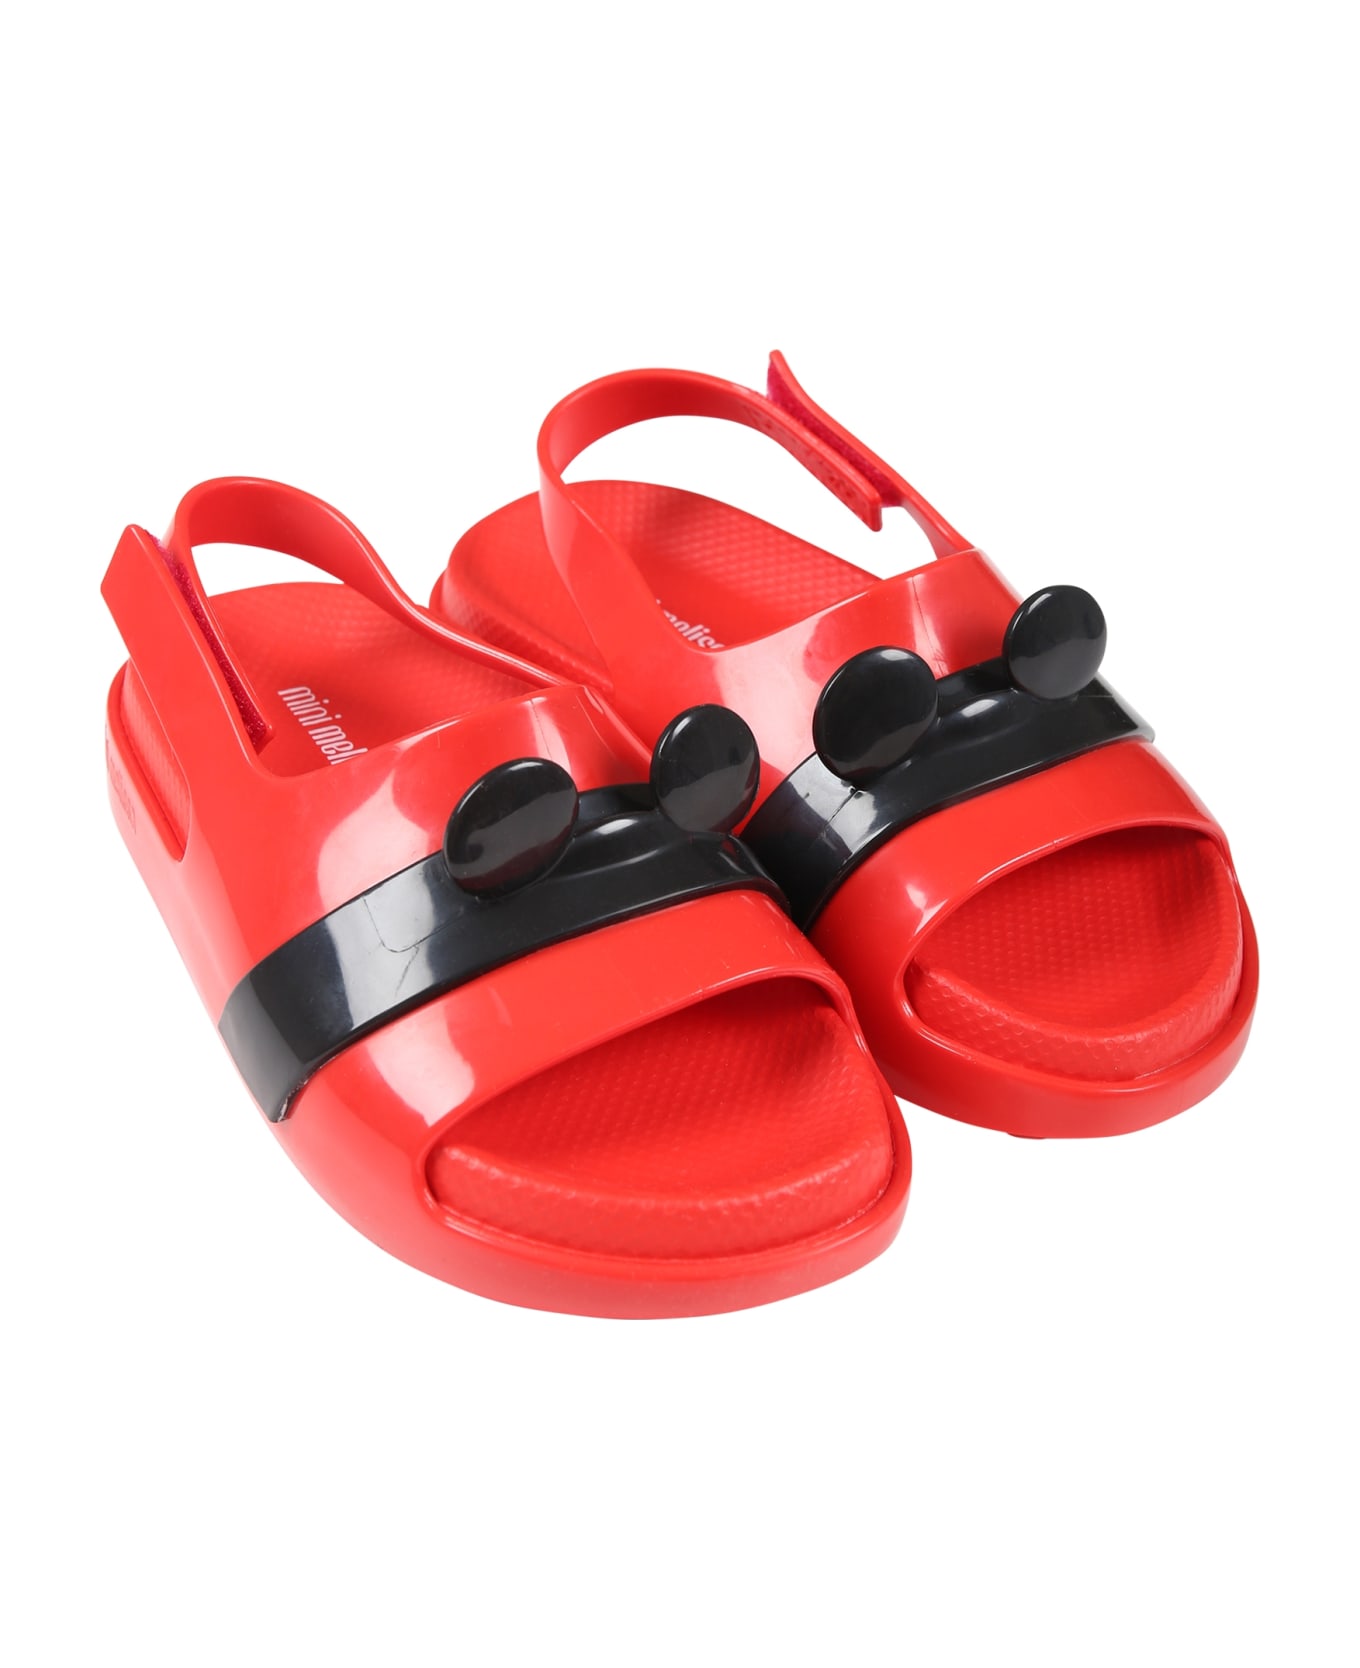 Melissa Red Sandals For Kids With Micki Mouse Ears - Red